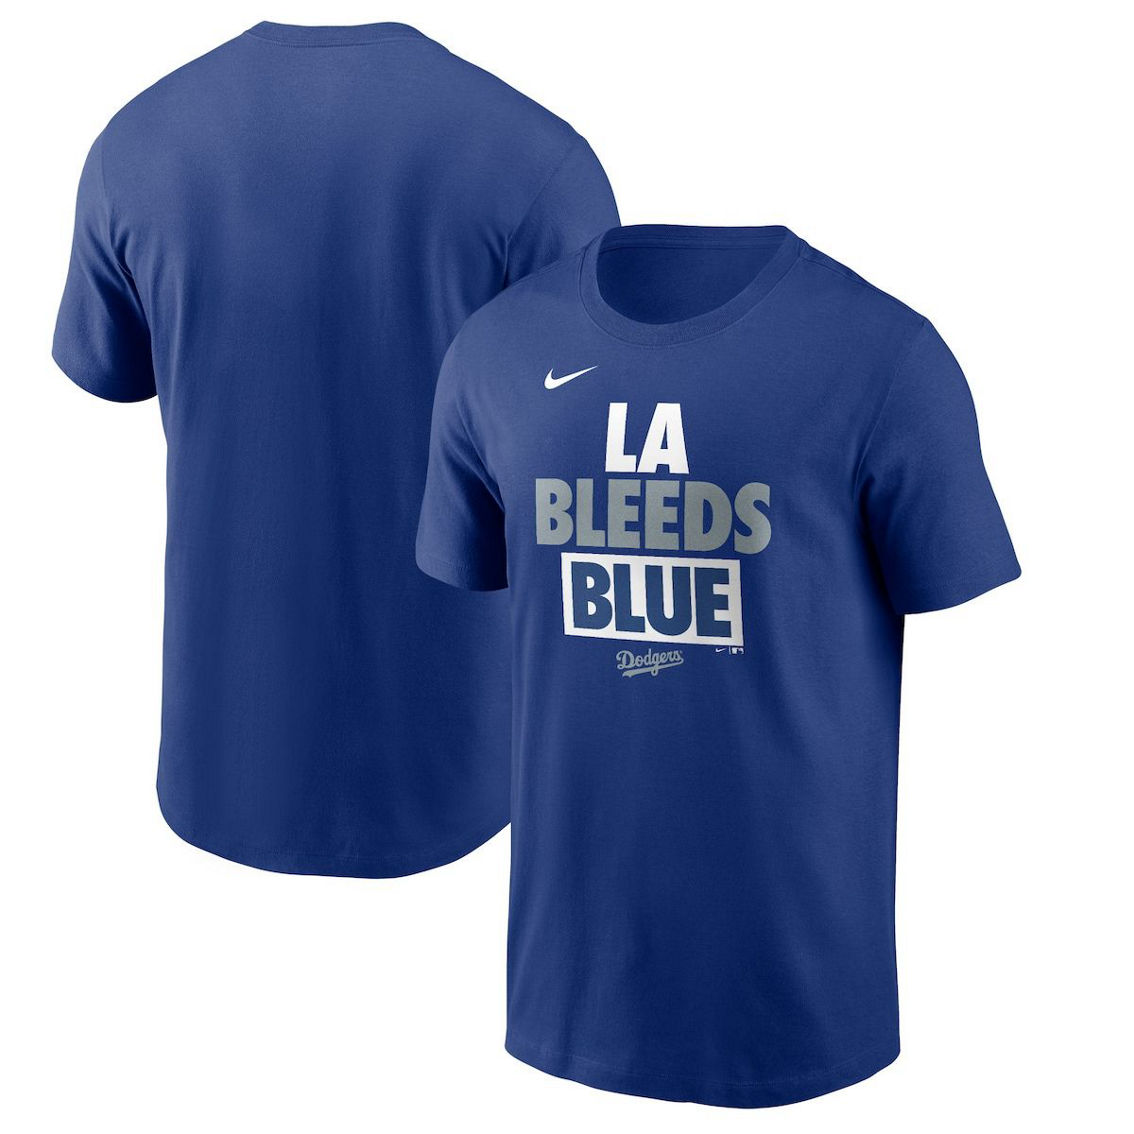 Nike Men's Royal Los Angeles Dodgers Rally Rule T-Shirt - Image 2 of 4